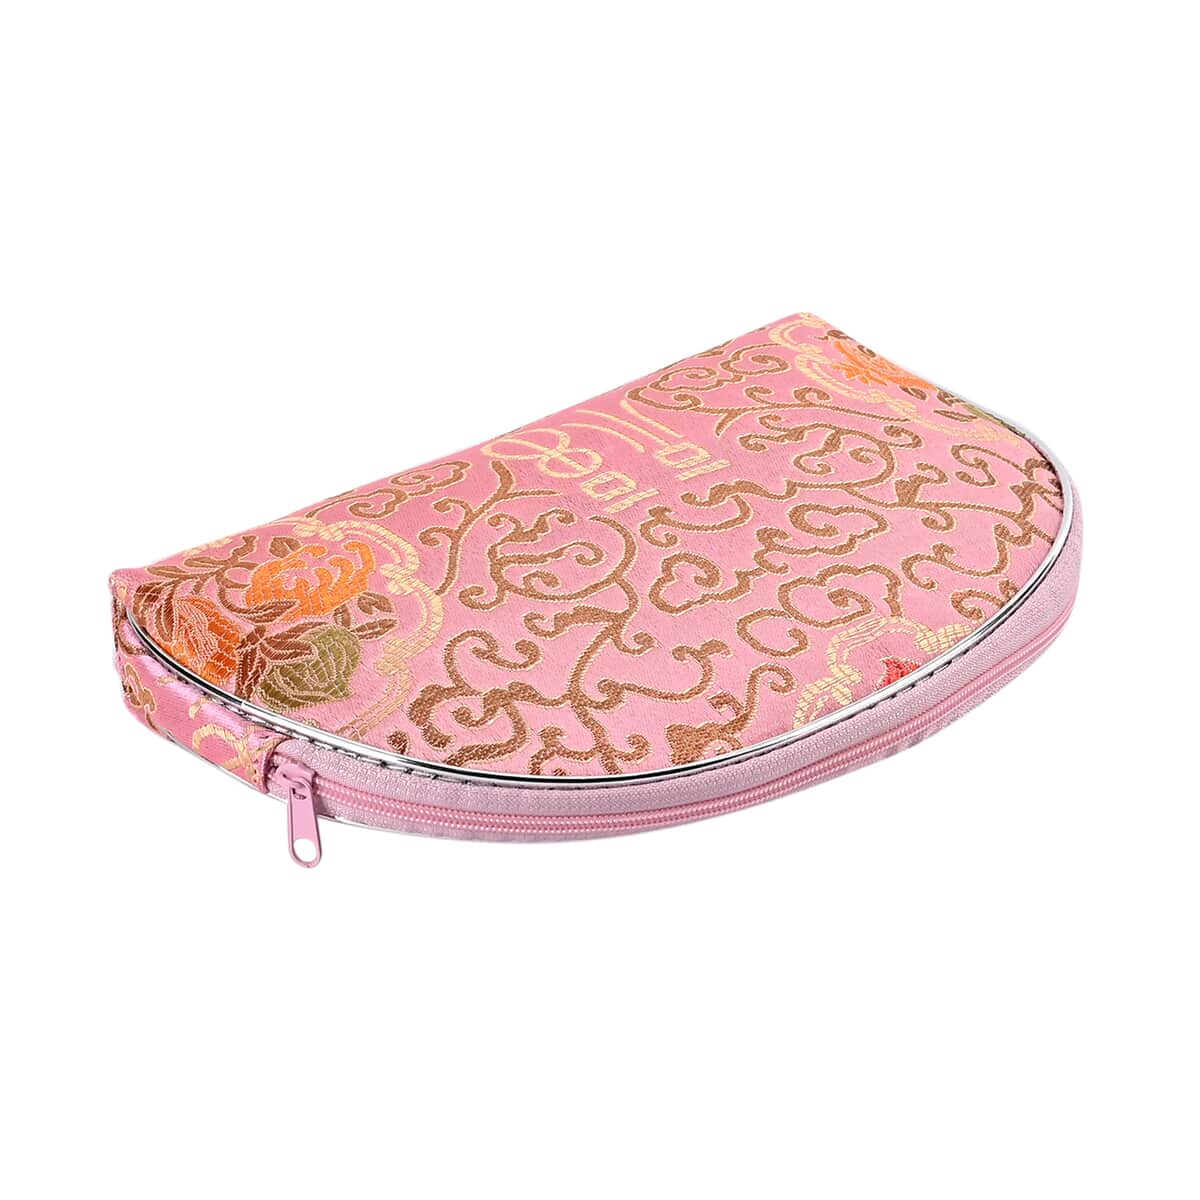 Set of 10 Pink Multi-Purpose Jewelry Bag with Zipper (8.7"x5.7", 6.9"x4.7", 5.5"x3.9", 4.3"x3.5", 3.5"x2.9") image number 3